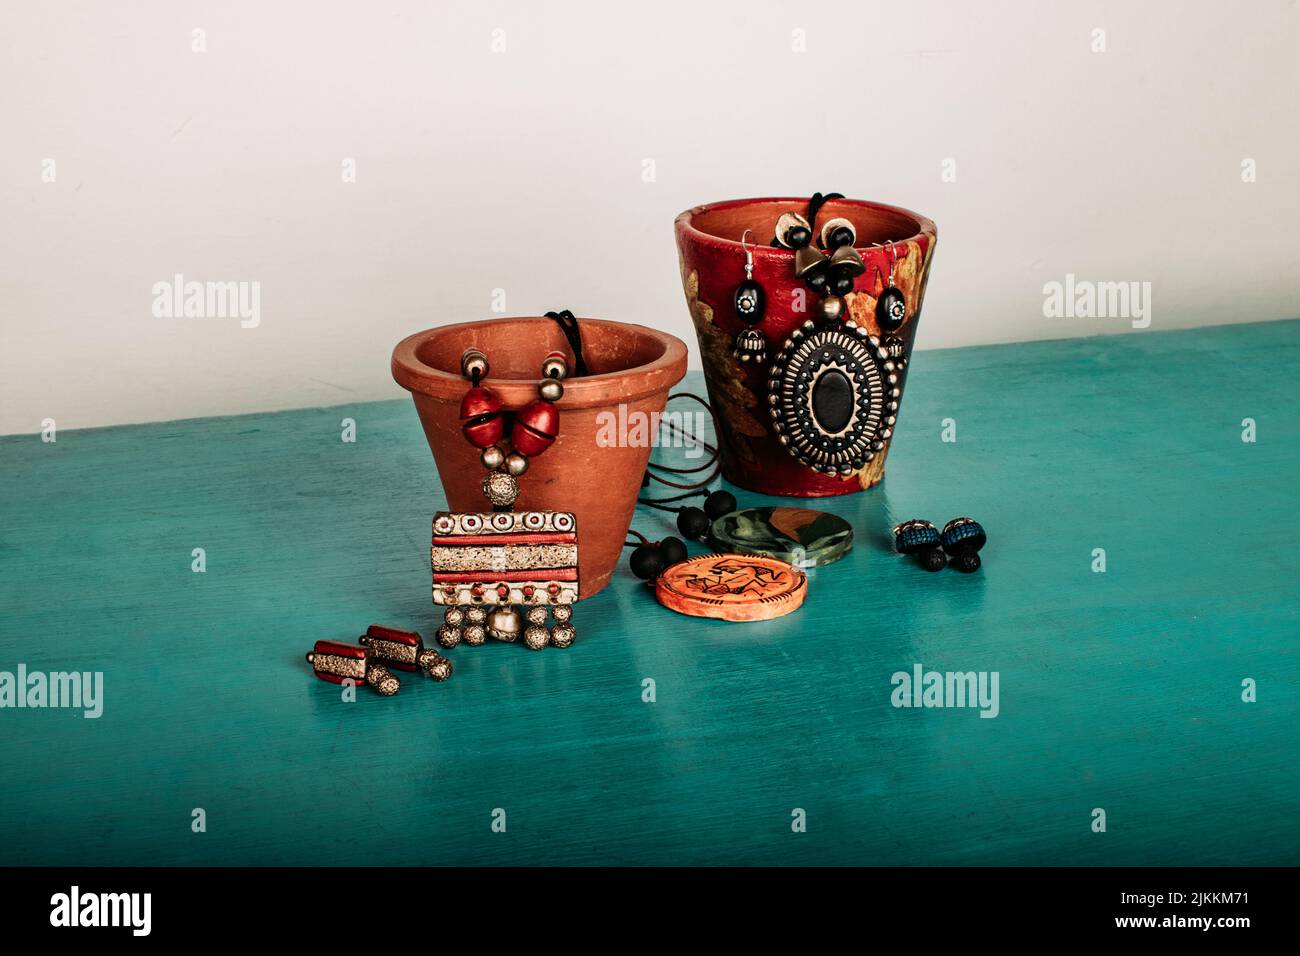 A closeup shot of traditional necklace and earring pieces set in decorated pots on a dark green table Stock Photo